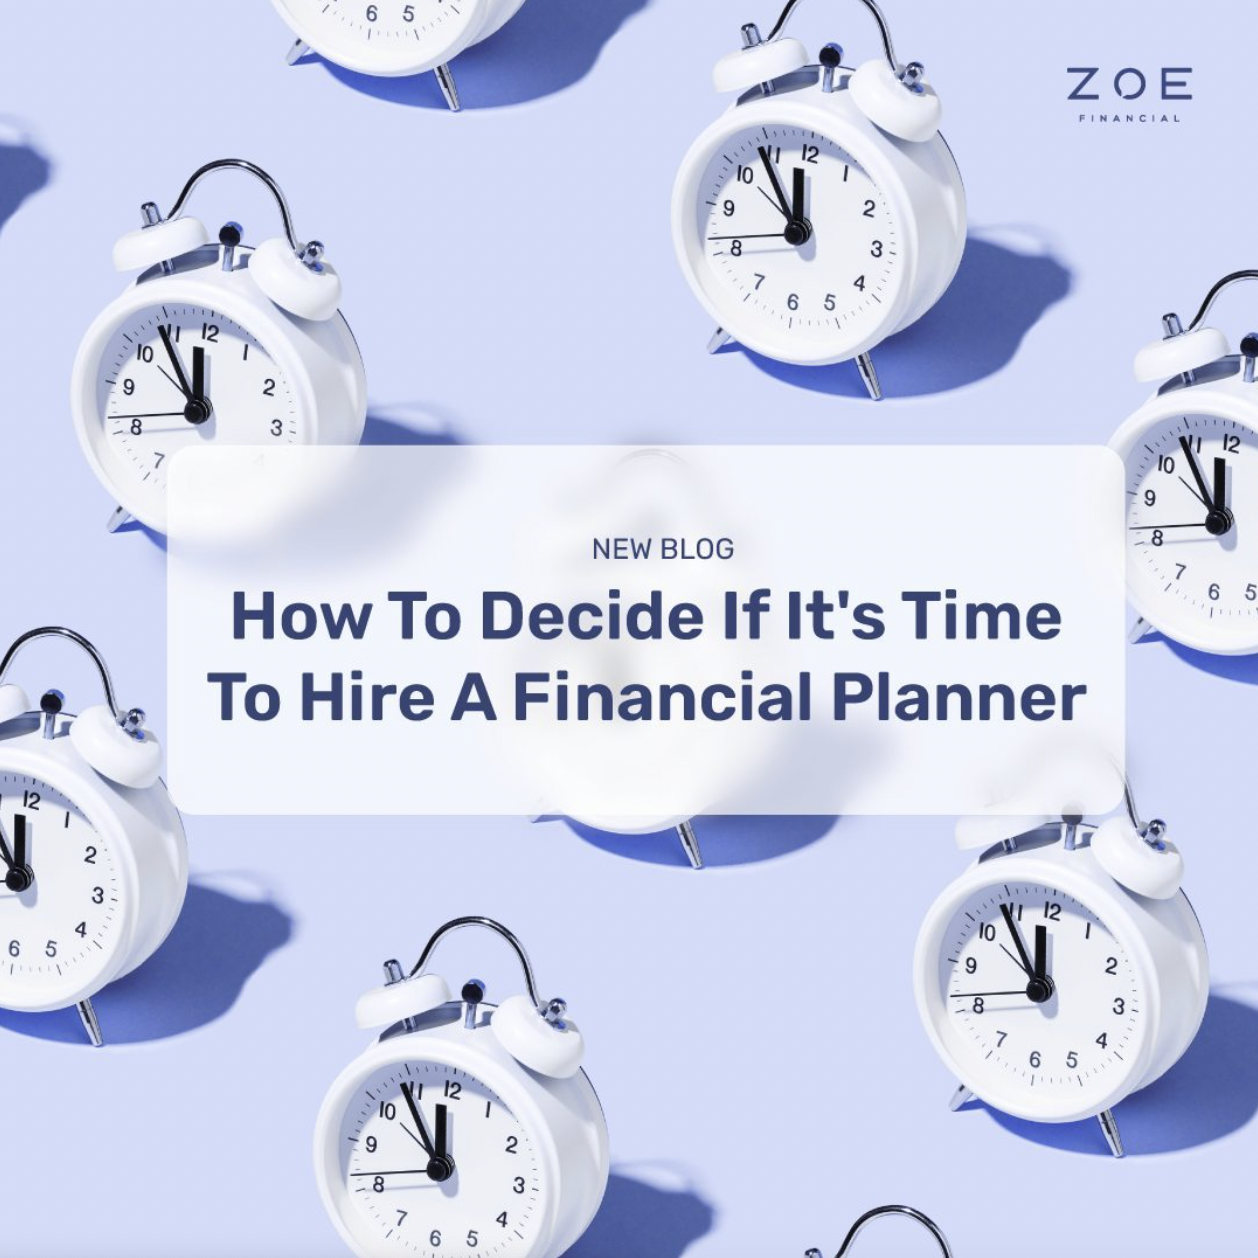 Zoe Press | How to decide if it’s time to hire a financial planner